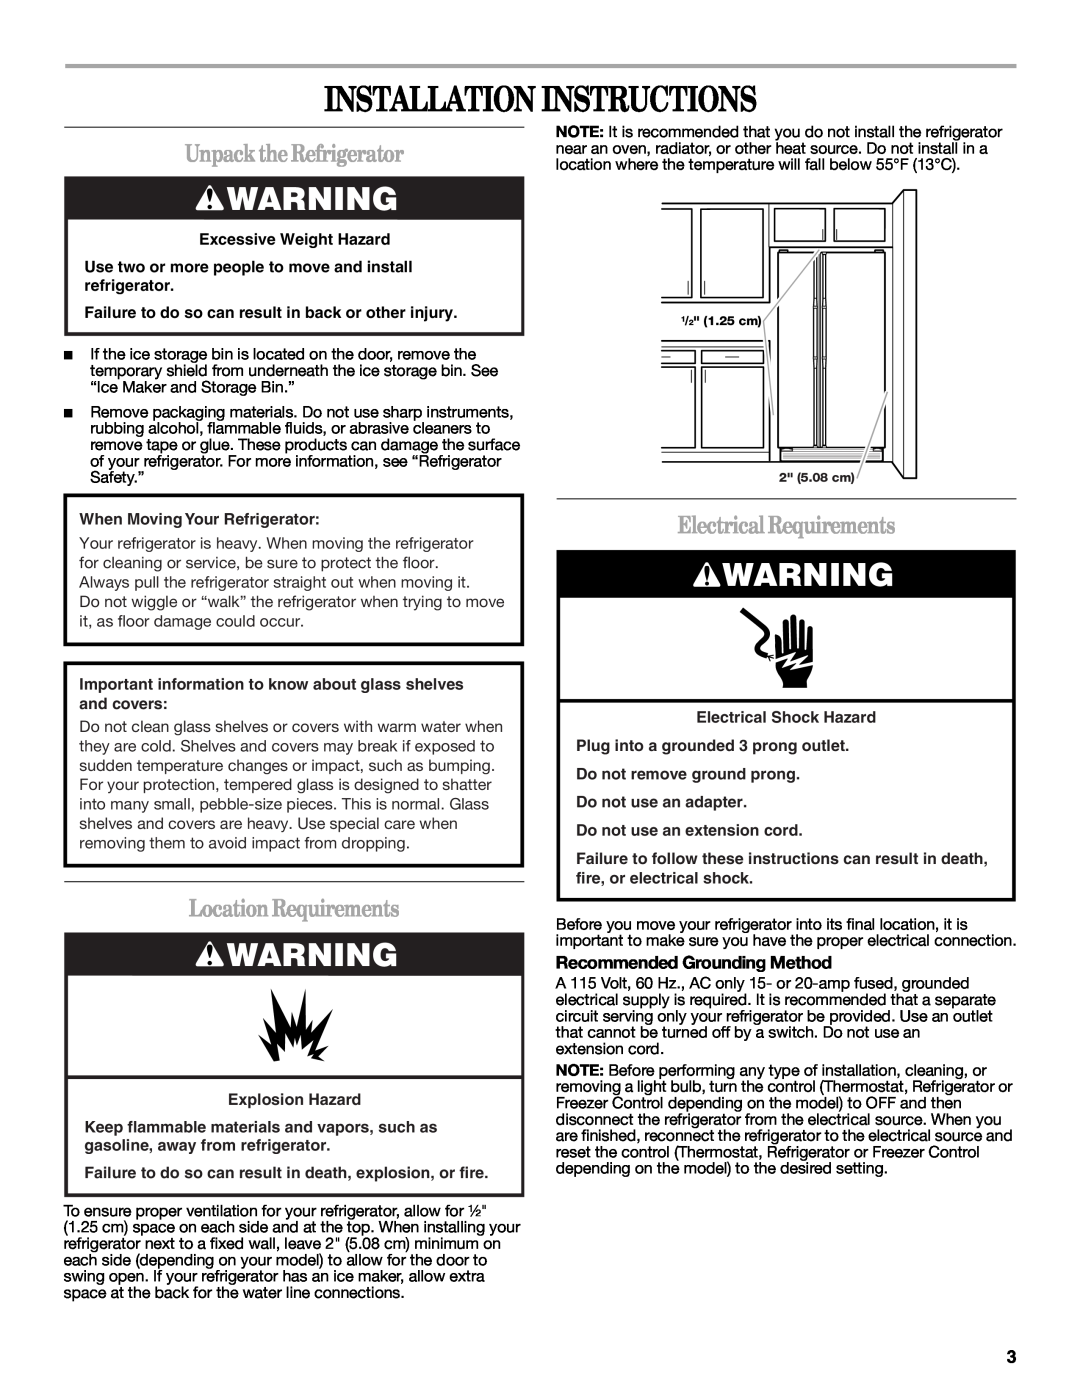 Whirlpool ES2FHAXSA00 Installation Instructions, UnpacktheRefrigerator, LocationRequirements, Electrical Requirements 